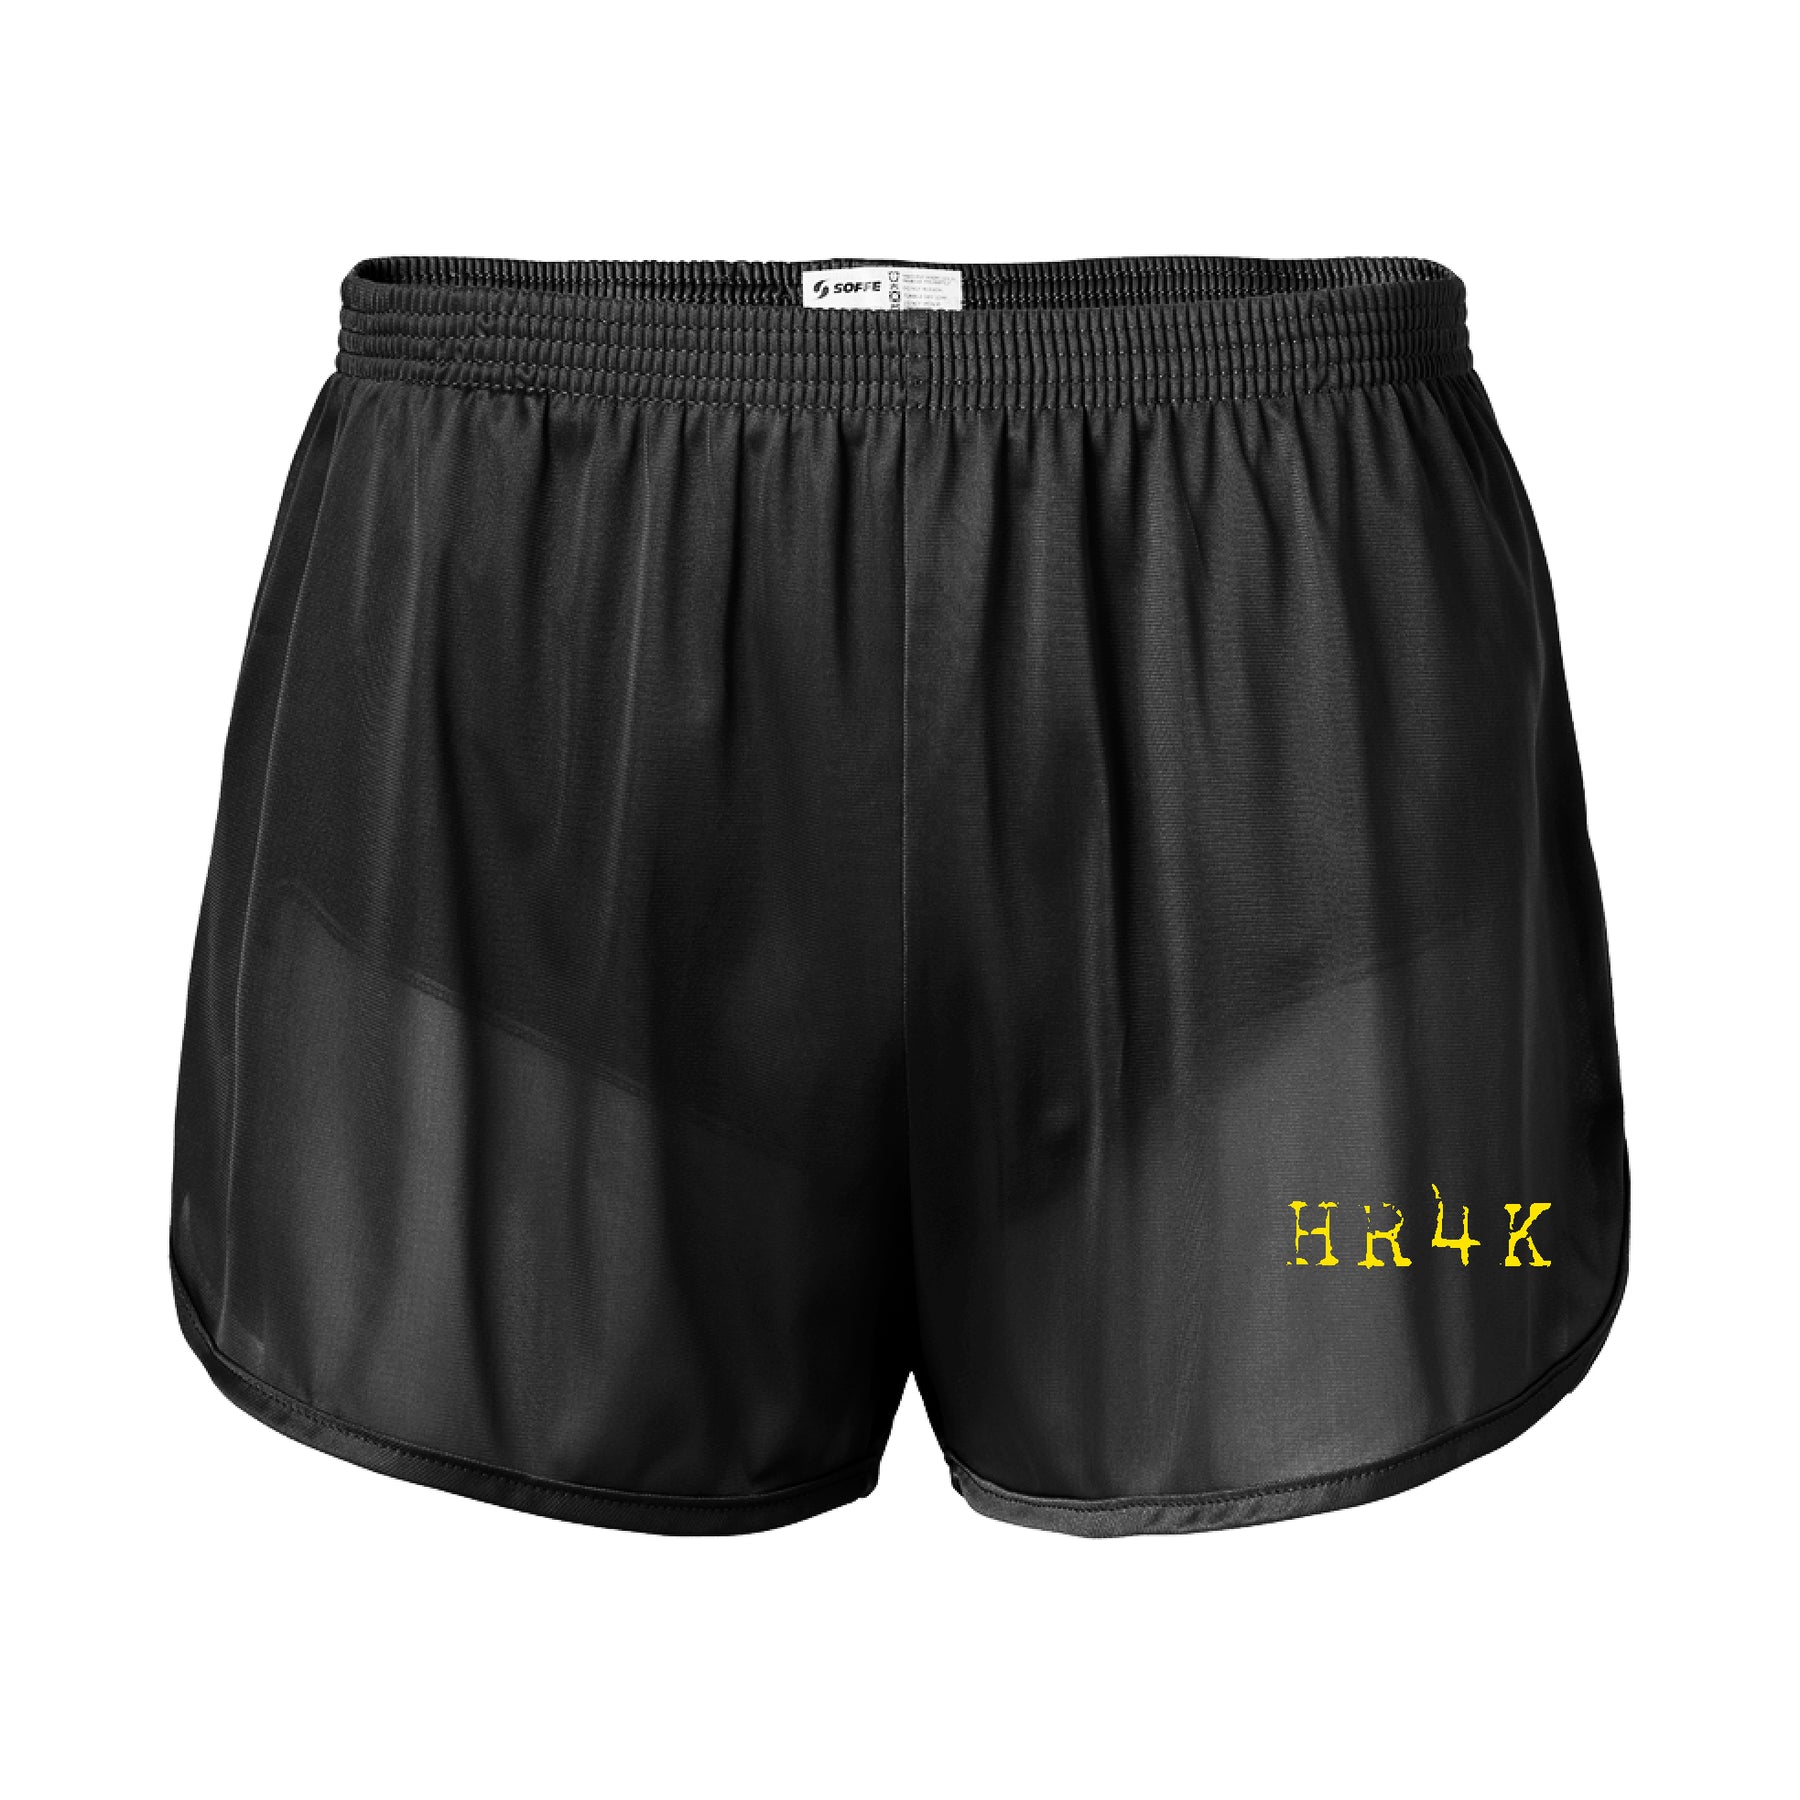 soffe shorts with writing